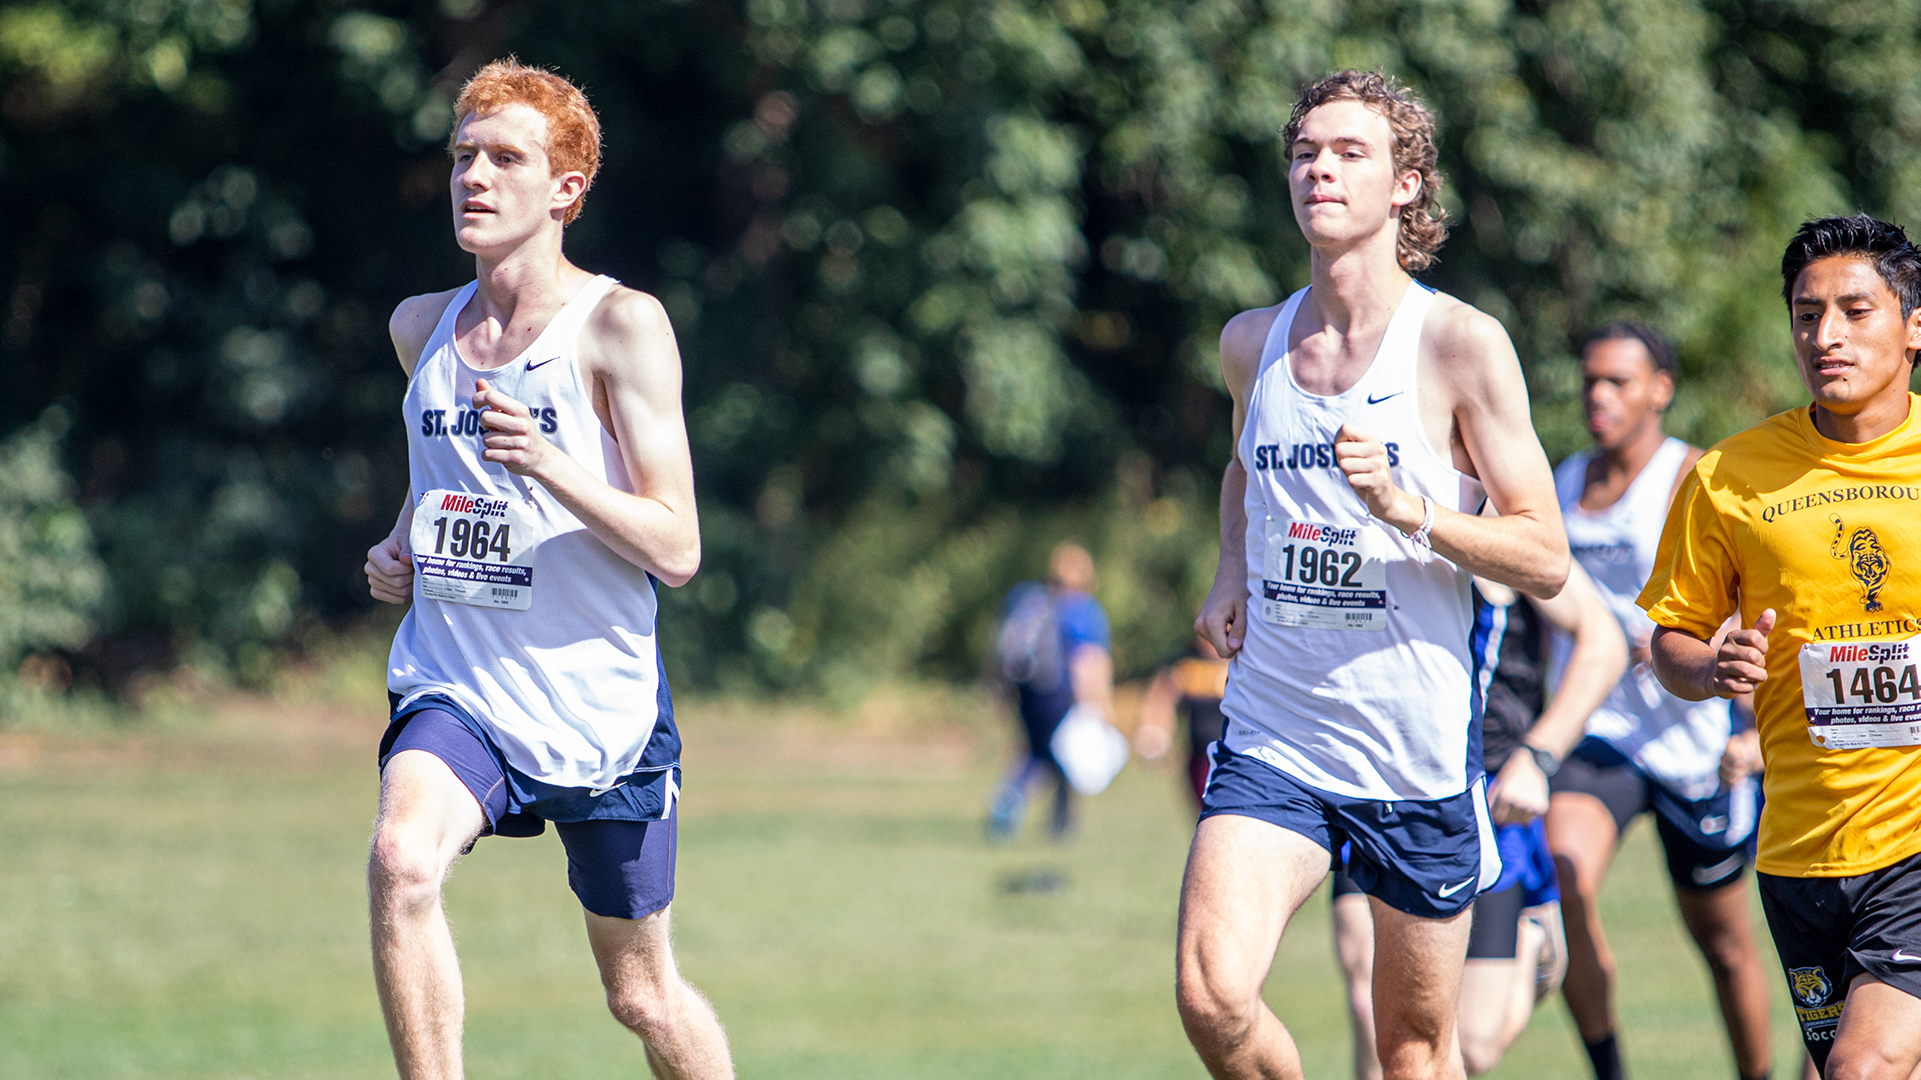 Rookies Estes and Tracy Lead Cross Country in Queensborough Invitational